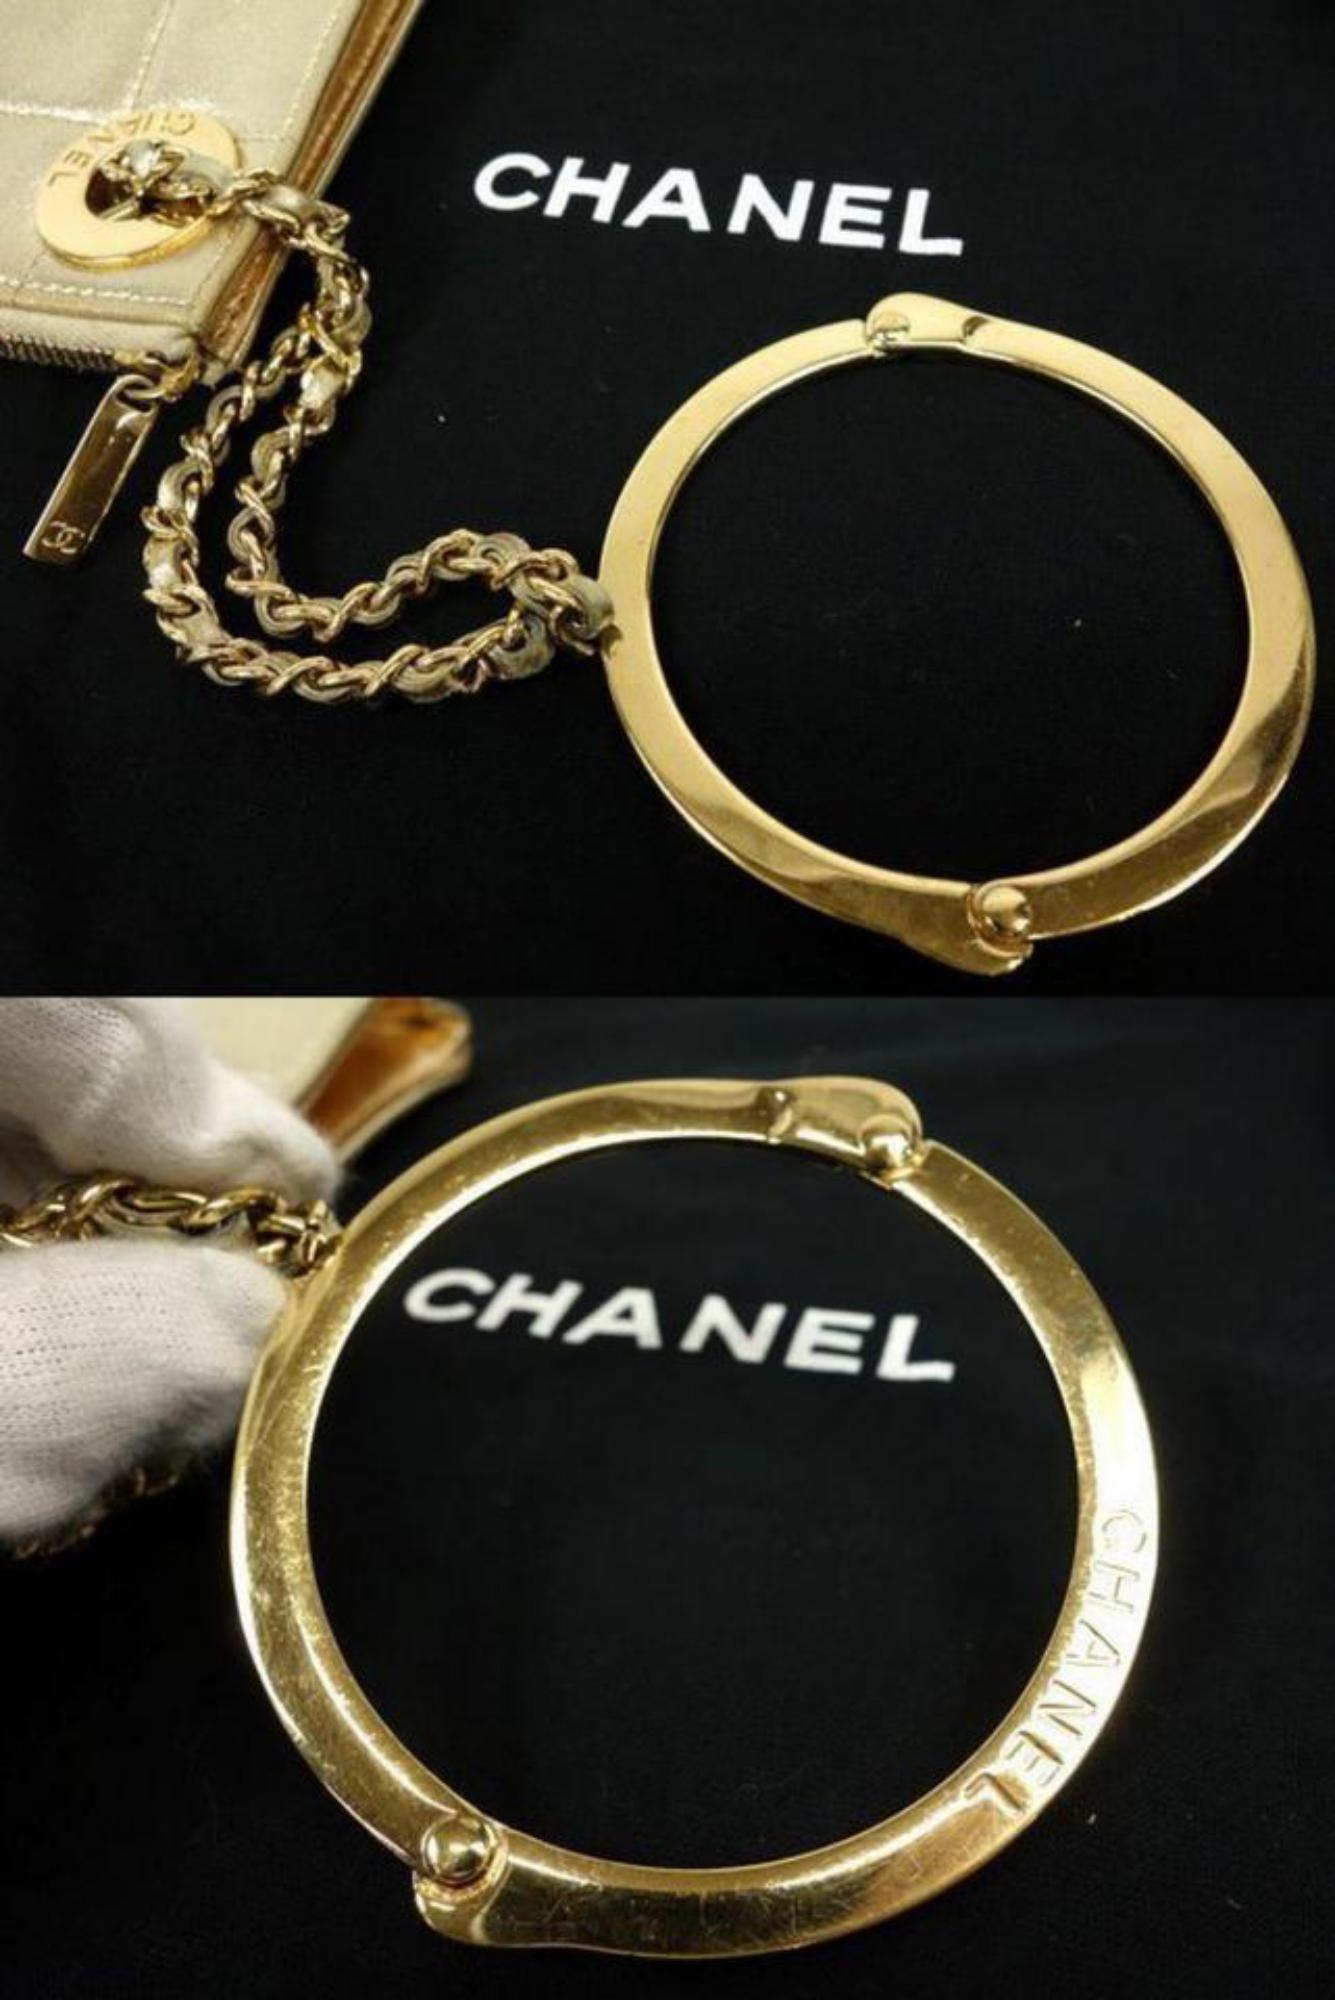 Chanel Clutch Chocolate Bar Handcuff Pochette 233769 Gold Leather Wristlet For Sale 4